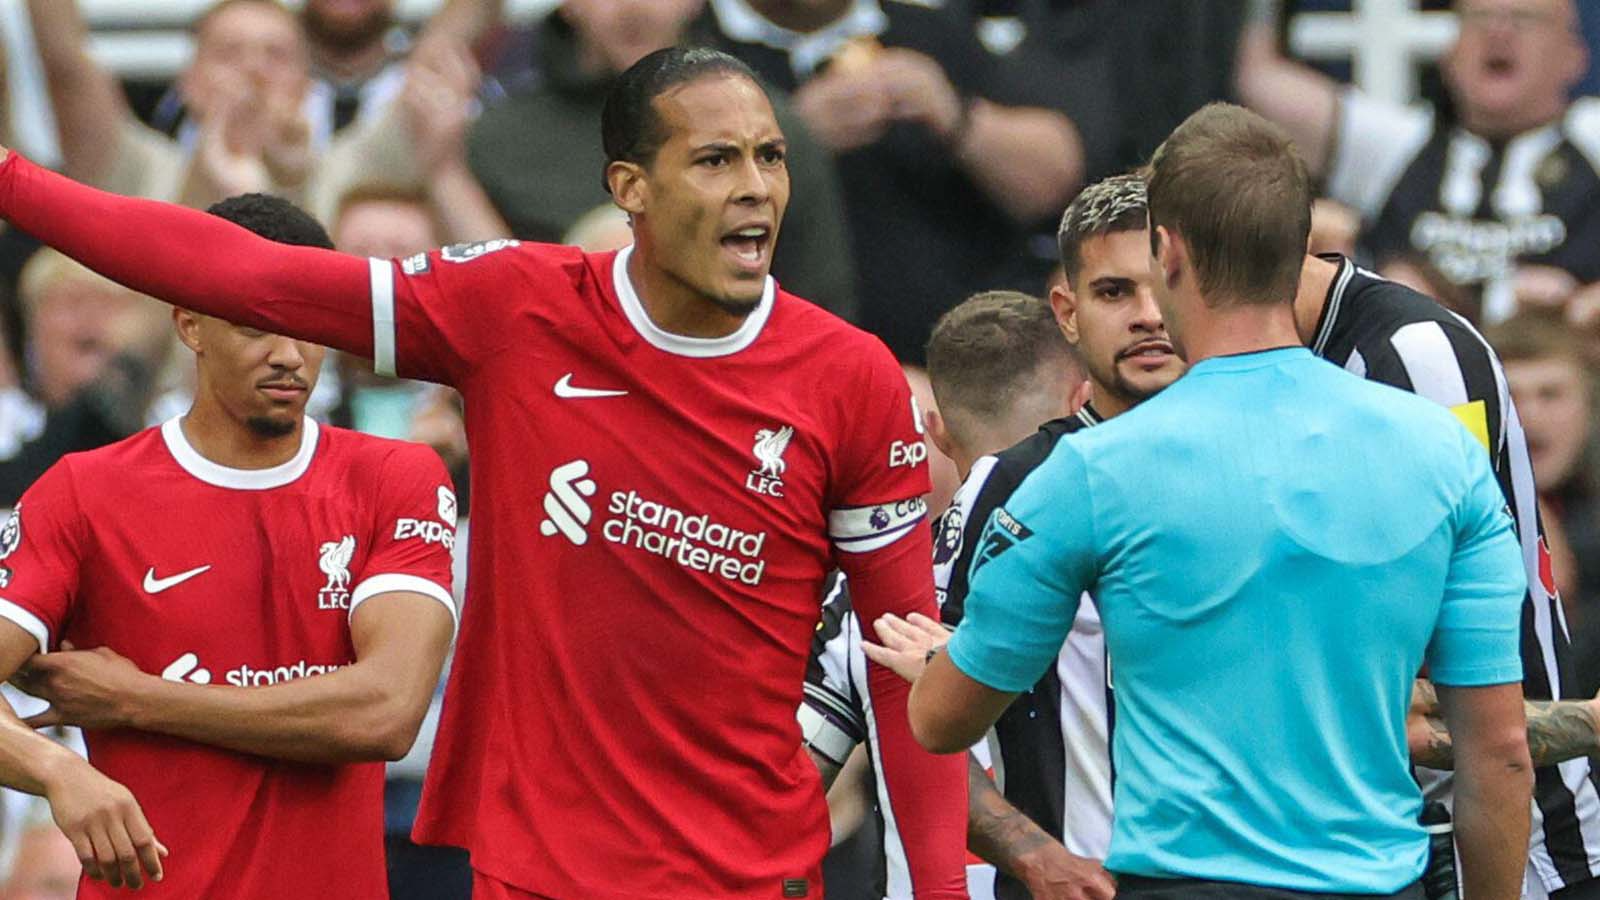 Van Dijk Comments On Penalty For Insulting Referees: I Let My Frustrations Get The Better Of Me